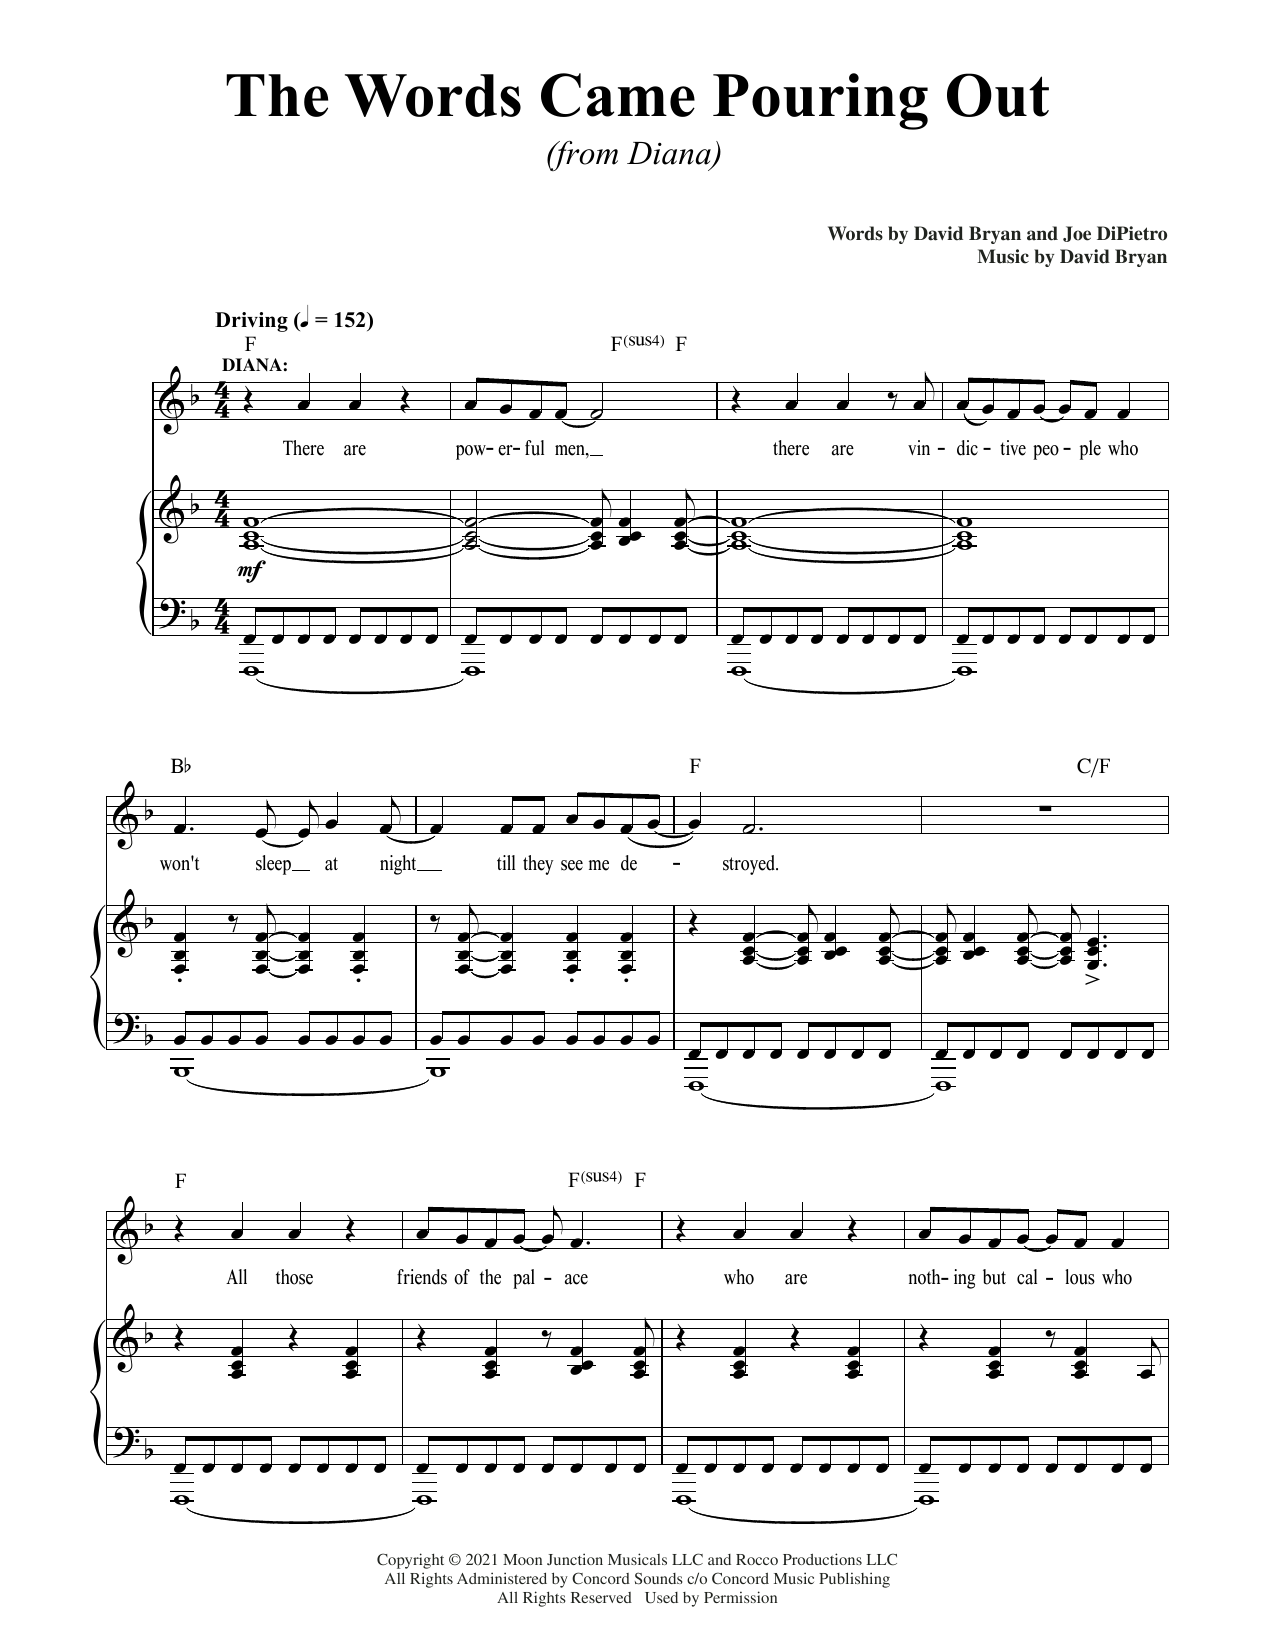 Download David Bryan & Joe DiPietro The Words Came Pouring Out (from Diana) Sheet Music